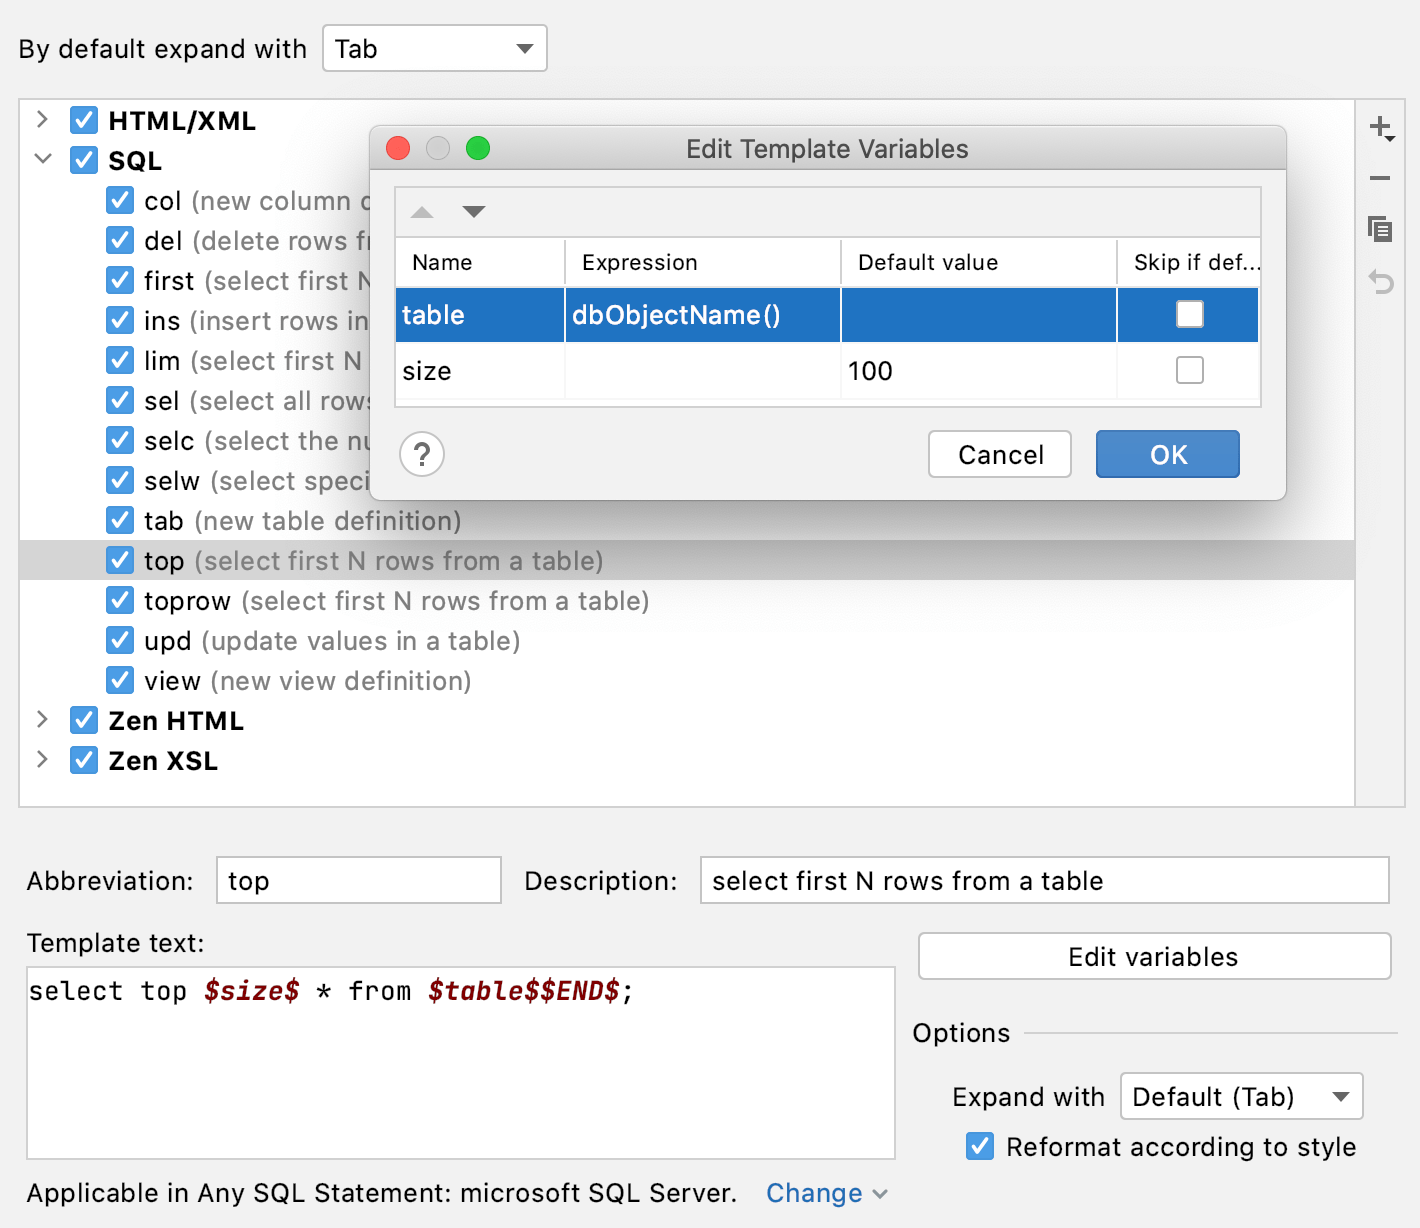 select first N rows from a table